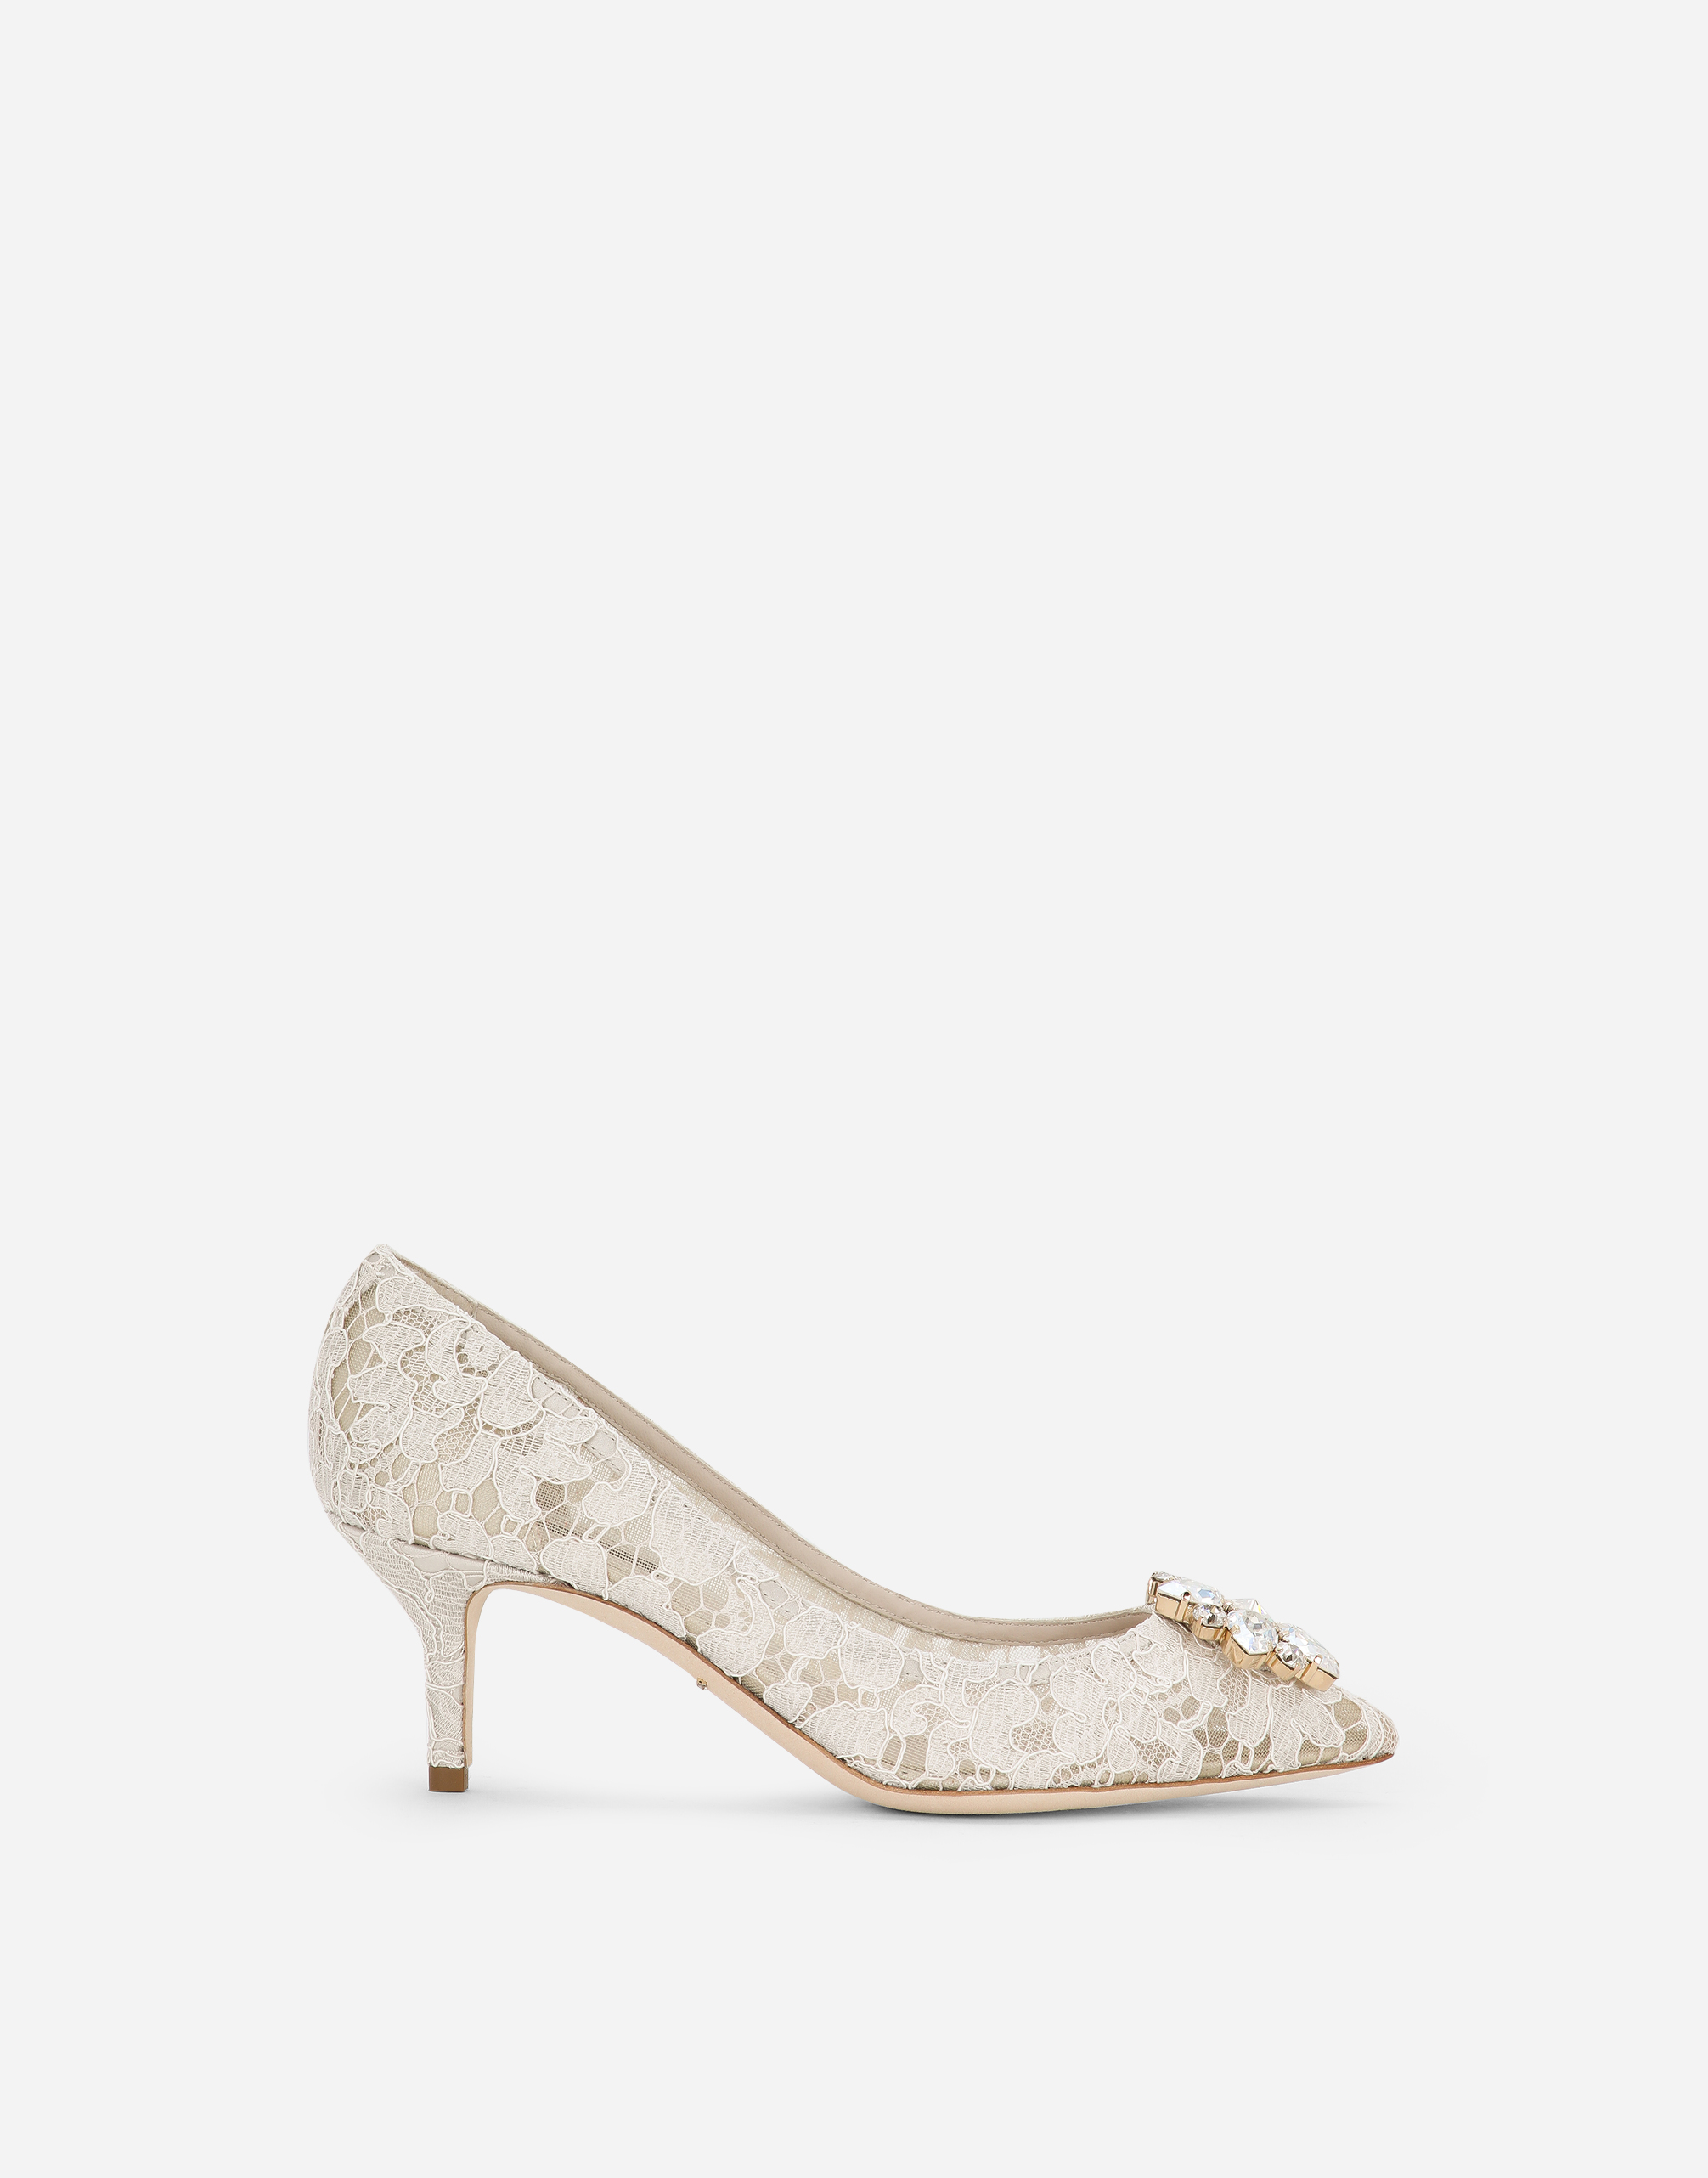 Pump in Taormina lace with crystals in White